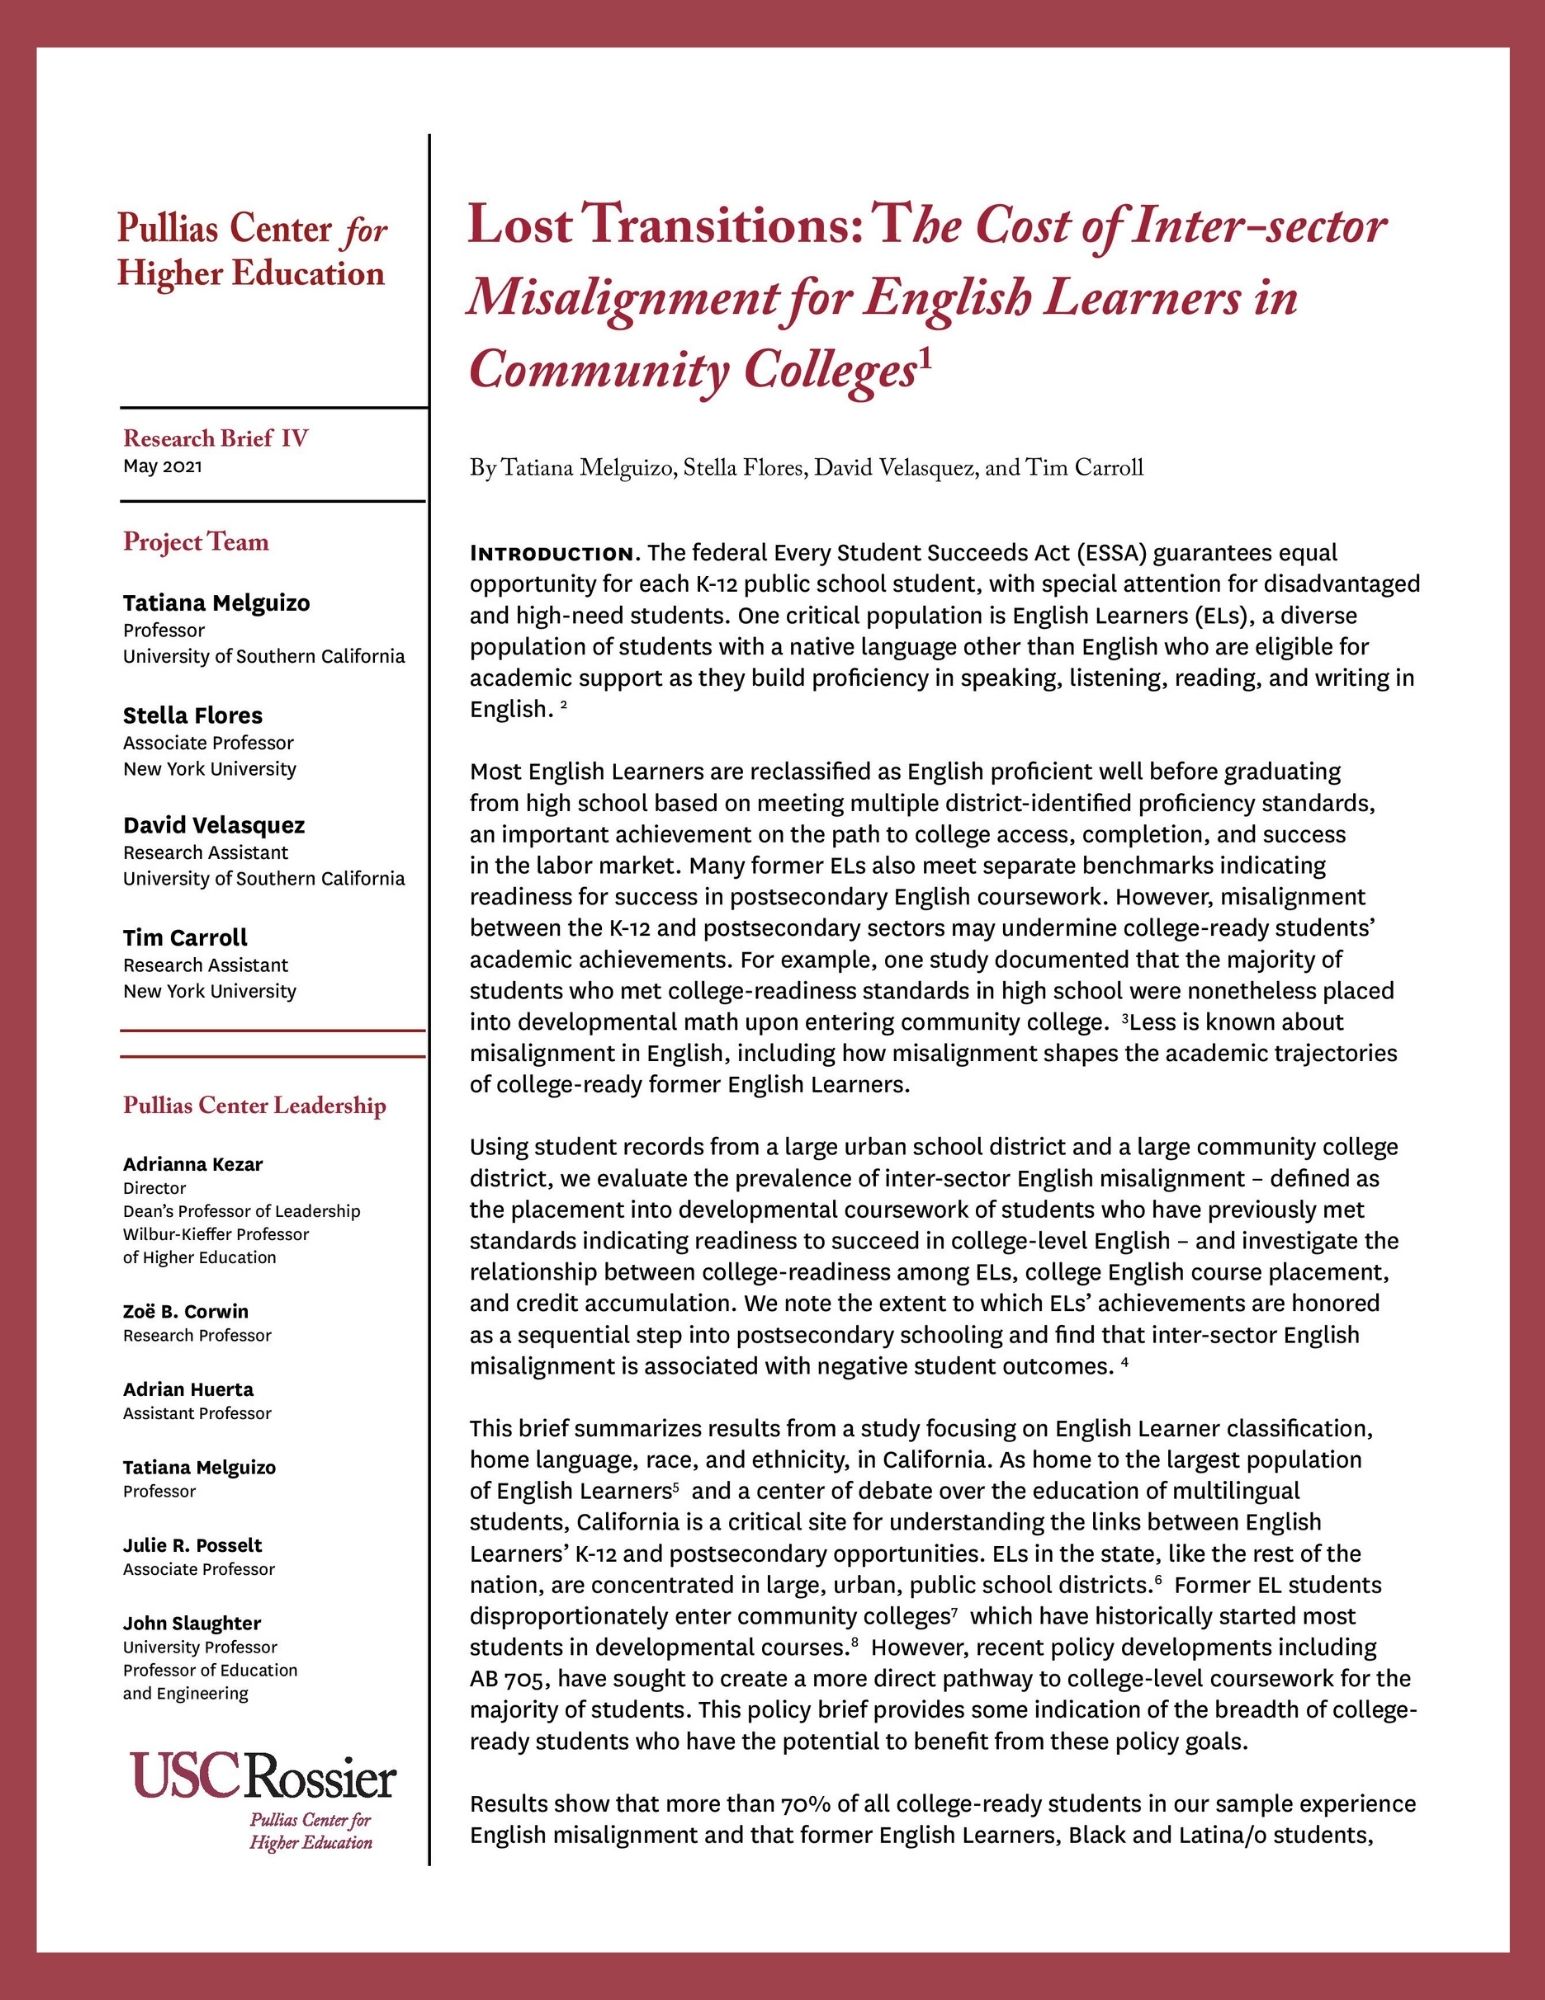 Lost Transitions: The Cost of Inter-sector Misalignment for English Learners in Community Colleges